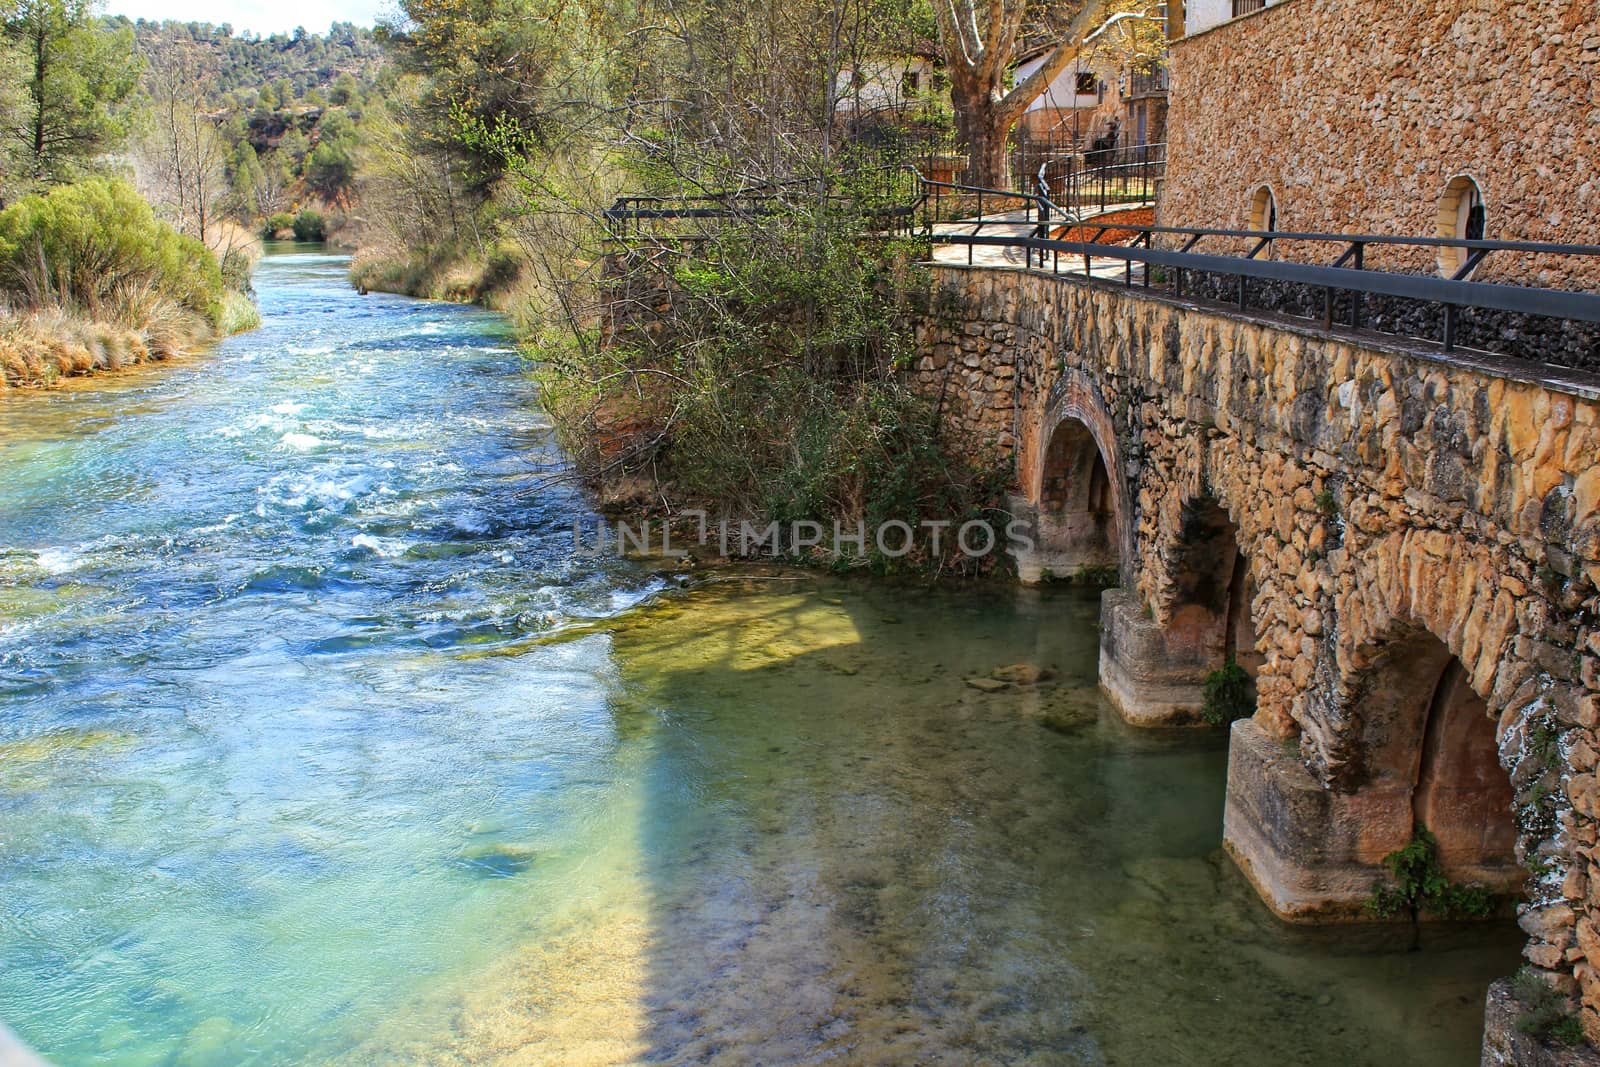 Cabriel River with crystal clear waters and surrounded by green vegetation in the mountains of Albacete, Spain